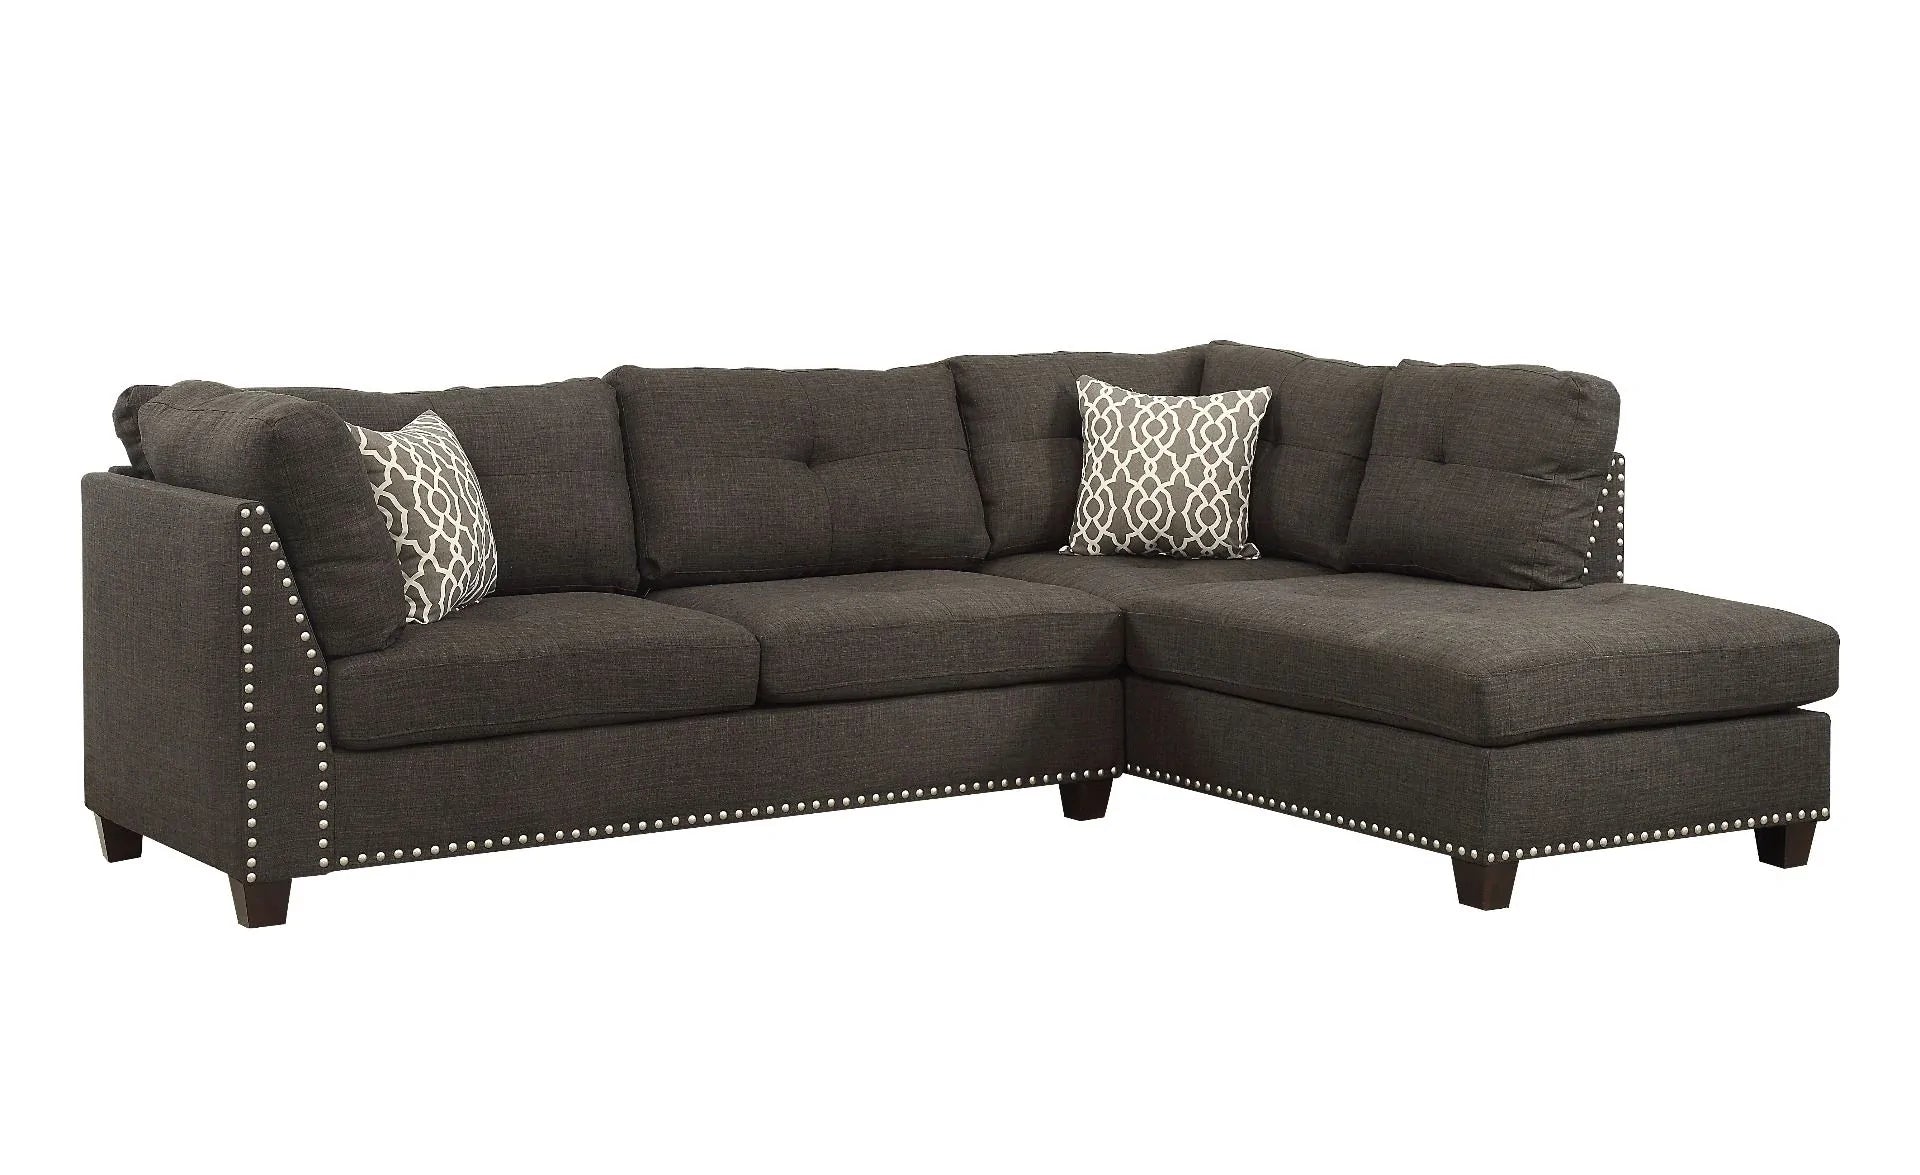 Laurissa Charcoal Linen Sectional Sofa Model 54375 By ACME Furniture